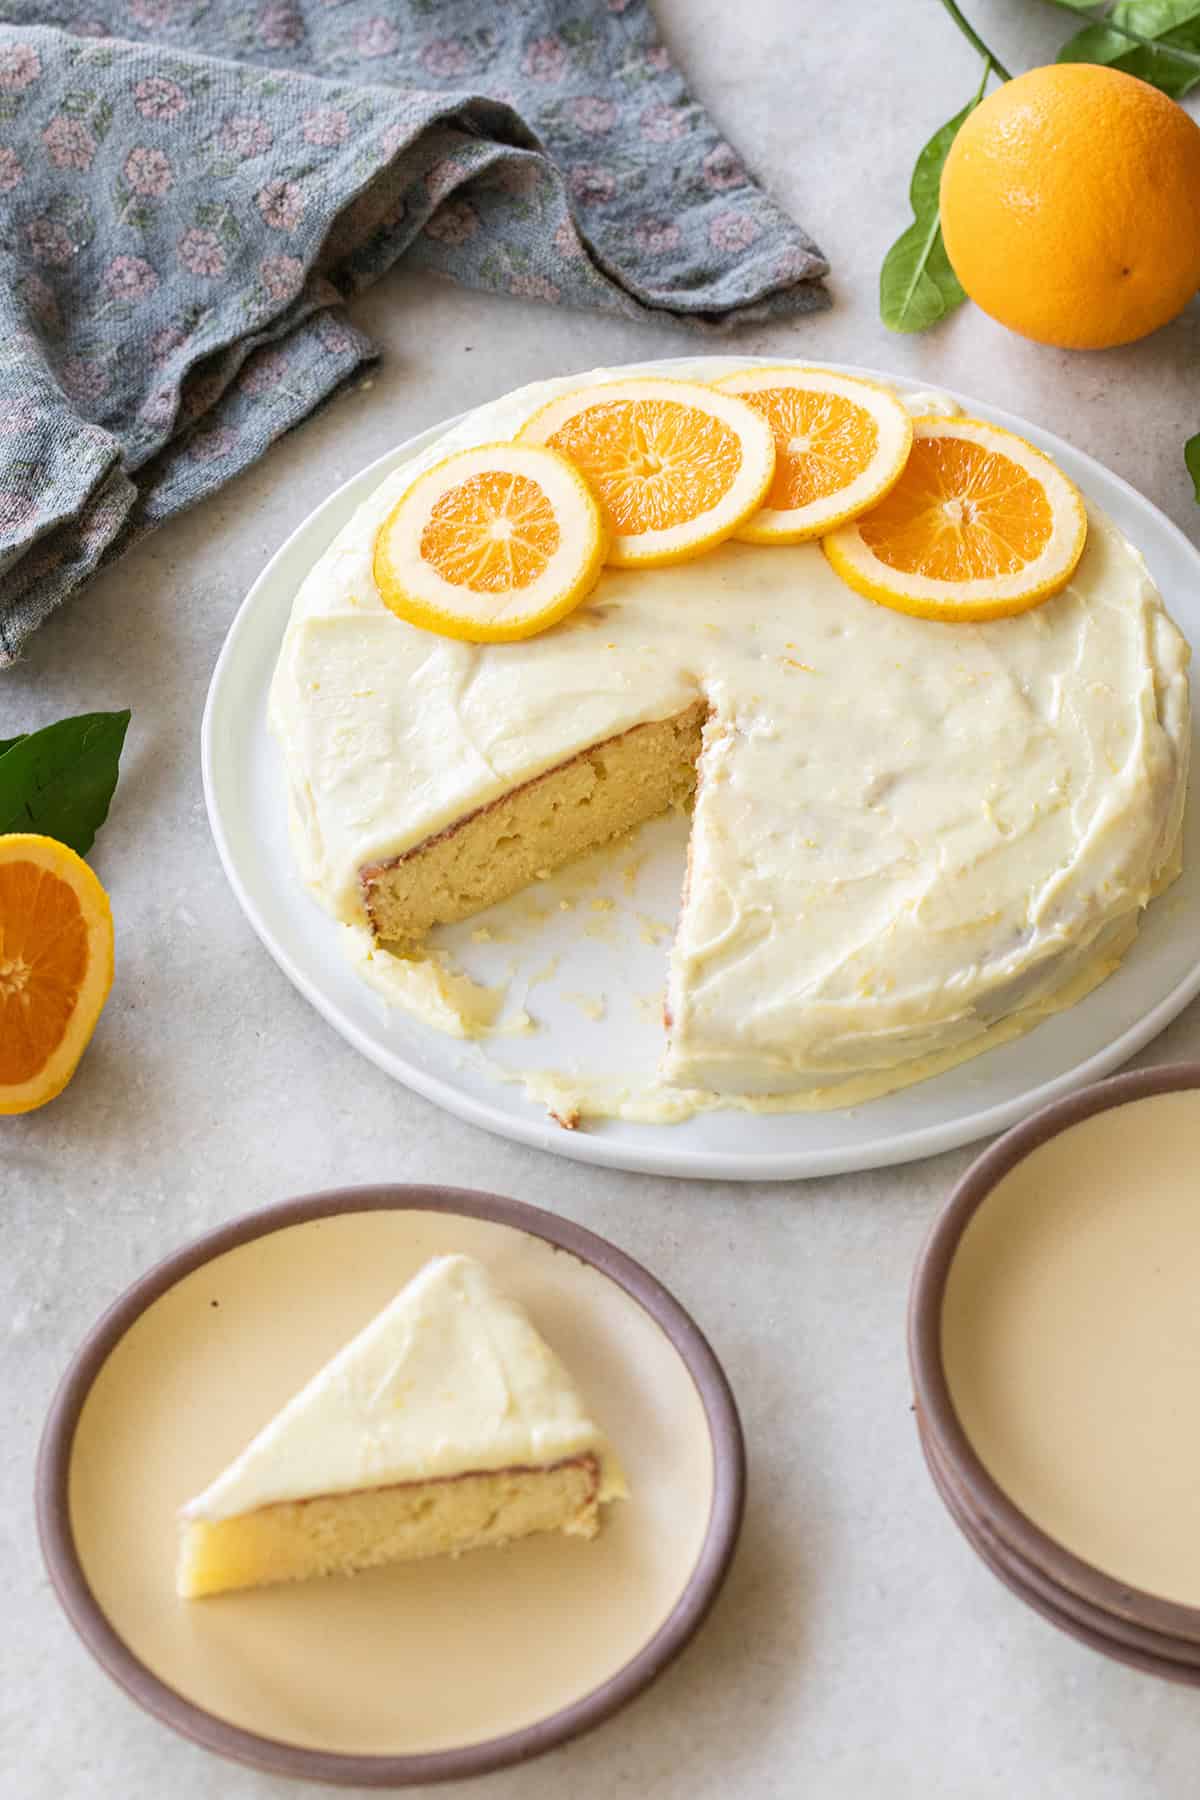 Easy, super moist ricotta cake with orange slices and orange icing over the top.